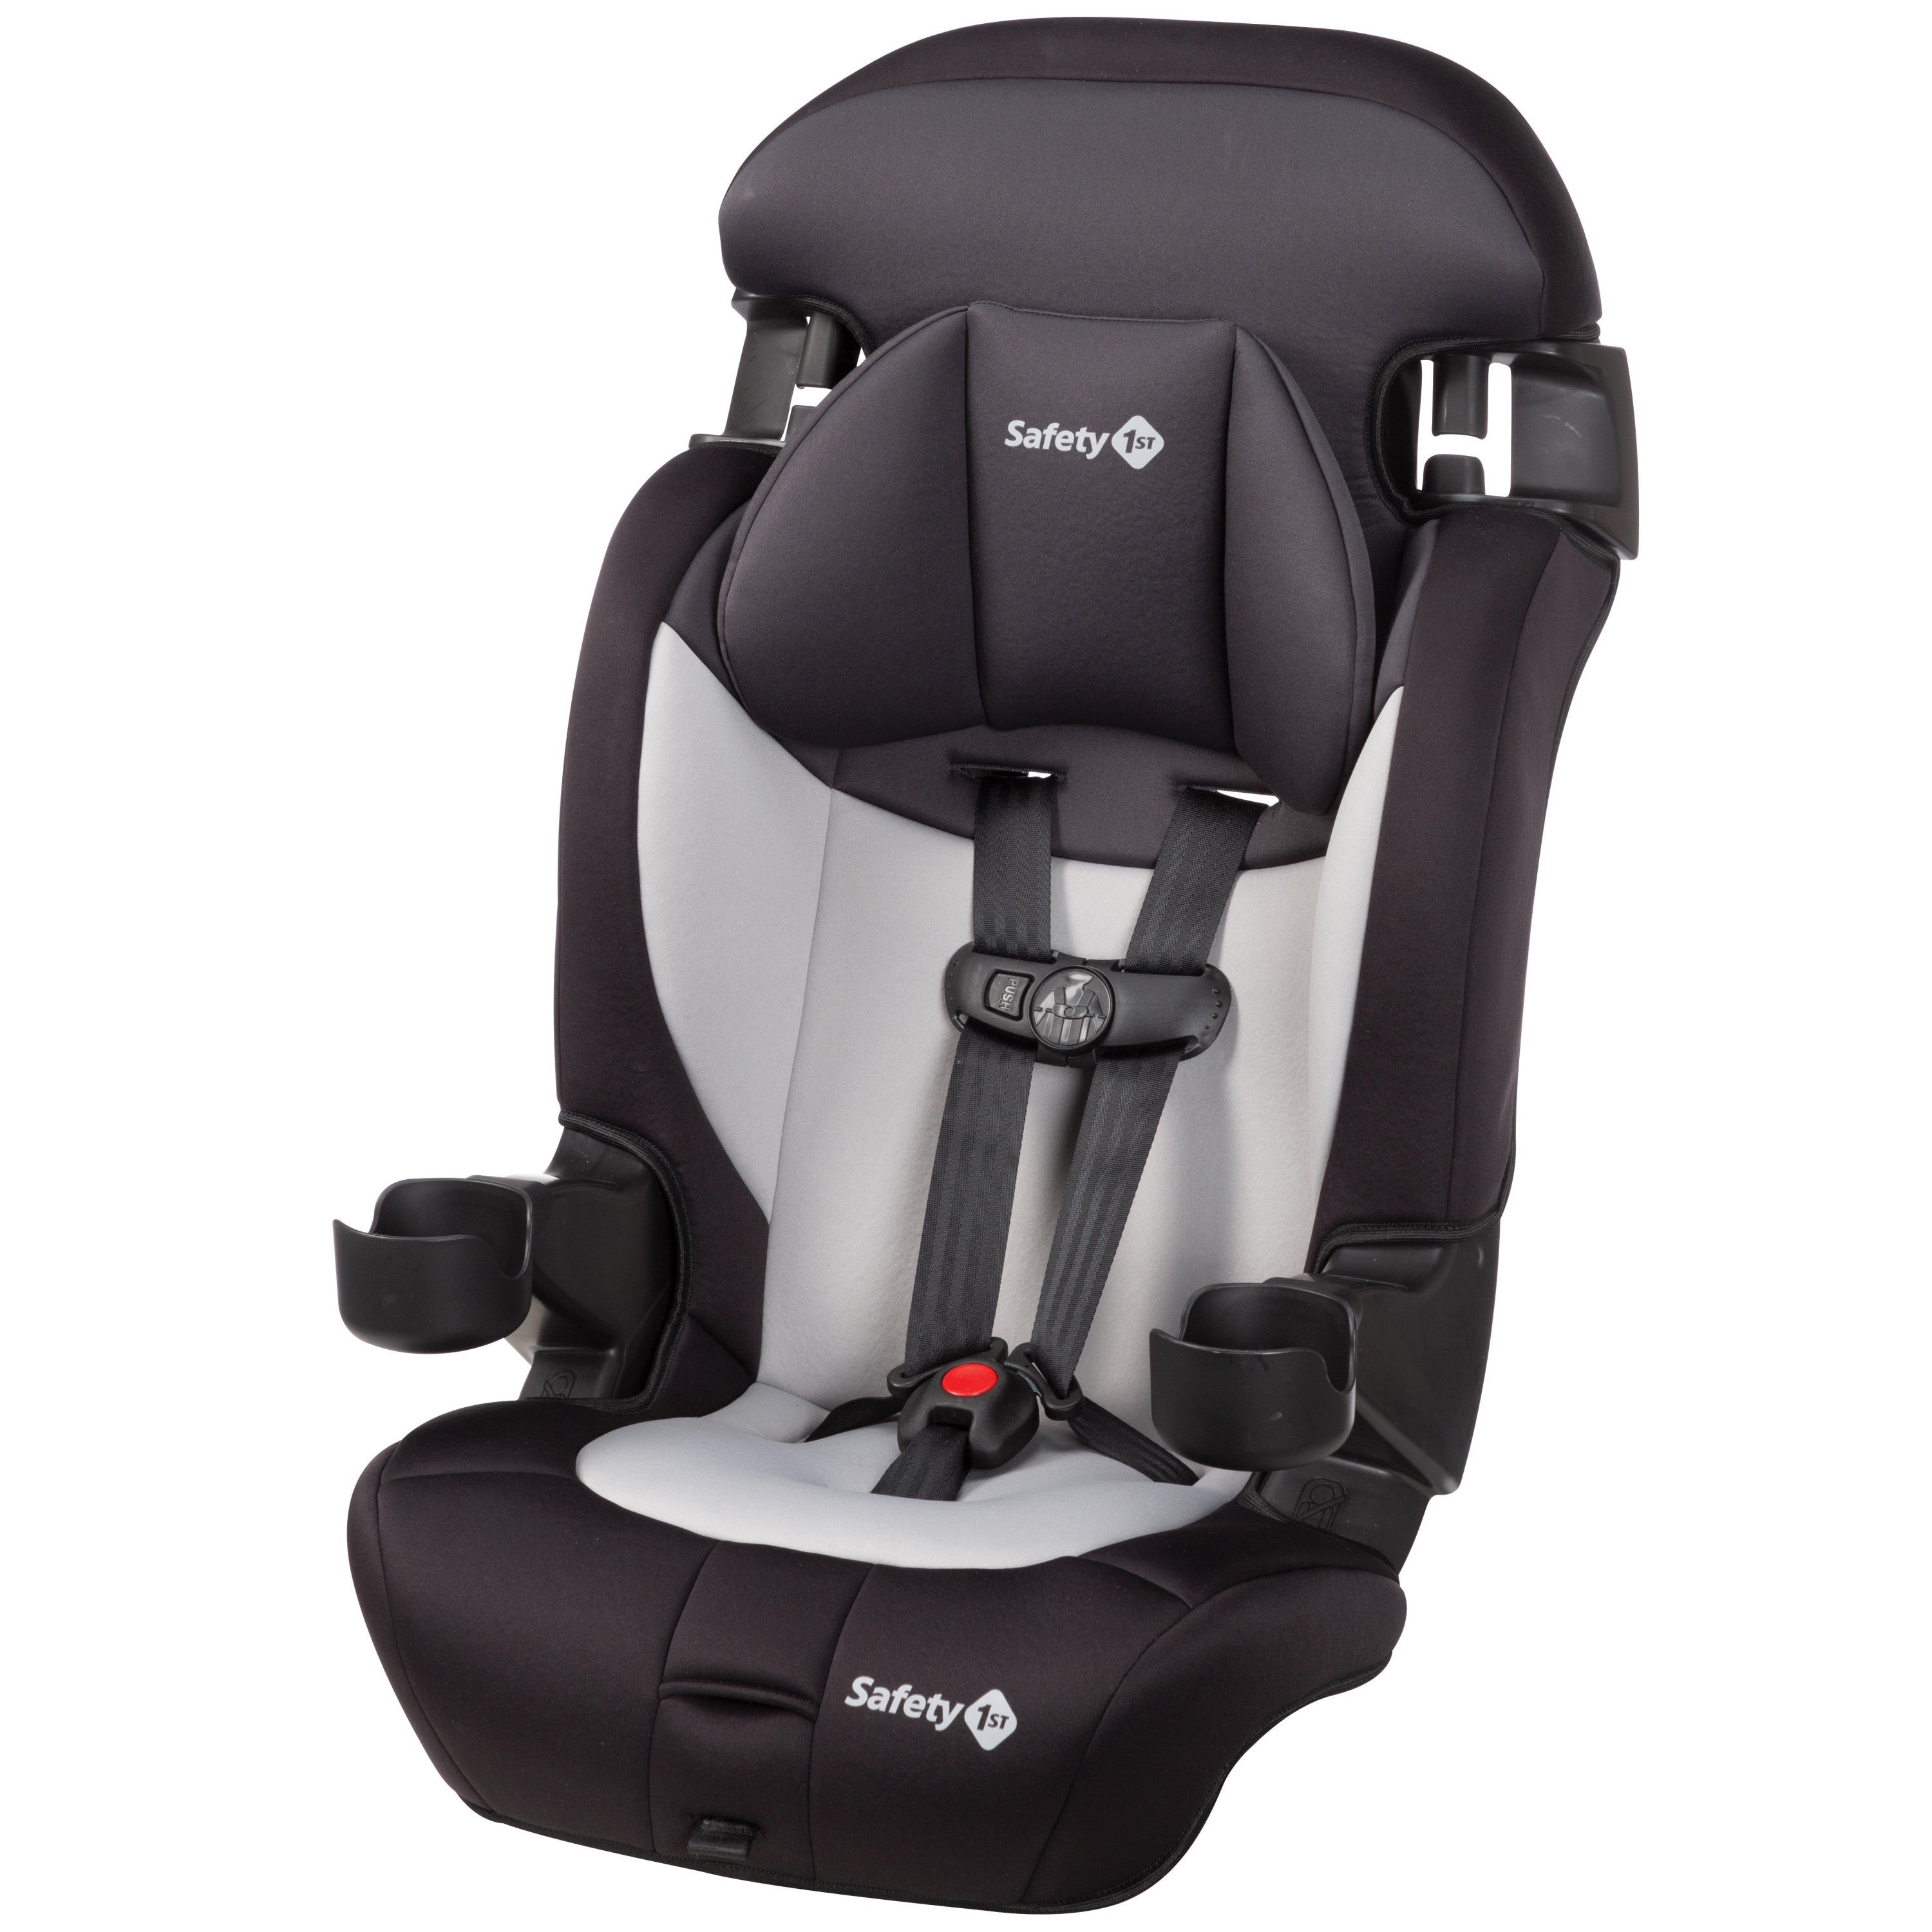 Grand 2-in-1 Booster Car Seat Black Sparrow